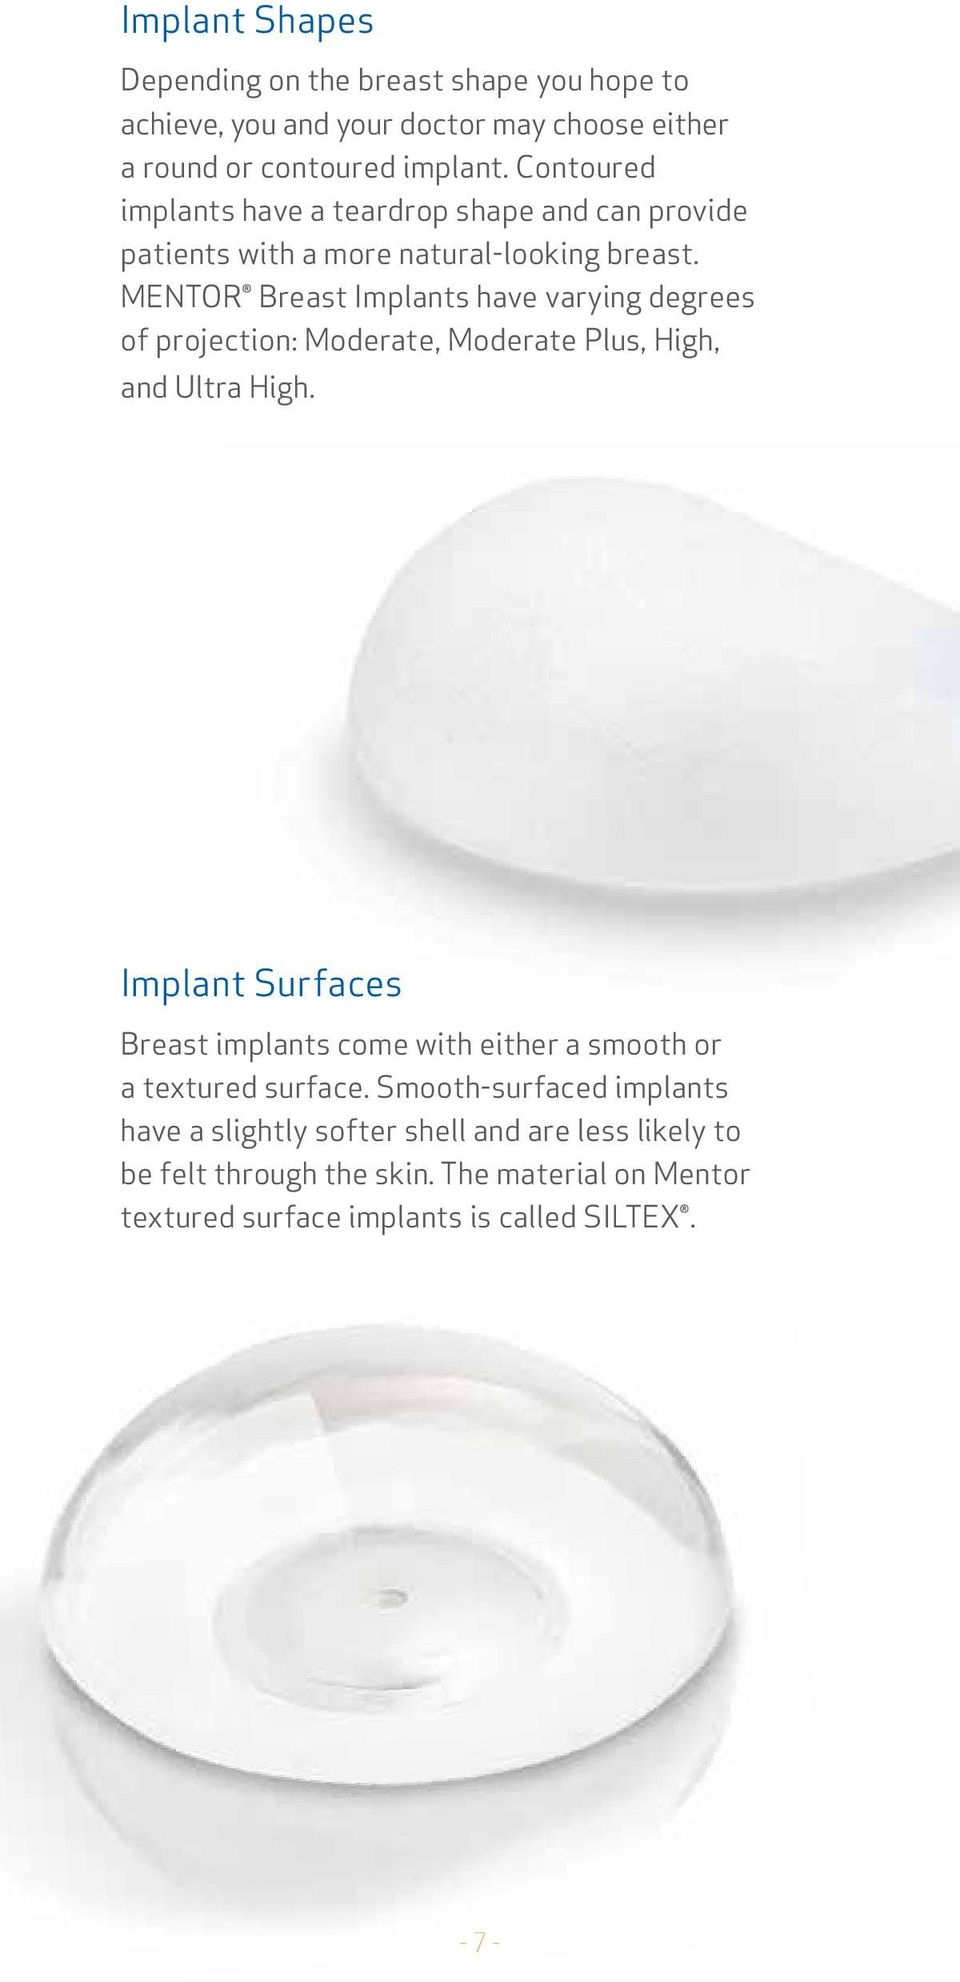 Mentor Breast Implants have varying degrees of projection: Moderate, Moderate Plus, High, and Ultra High.